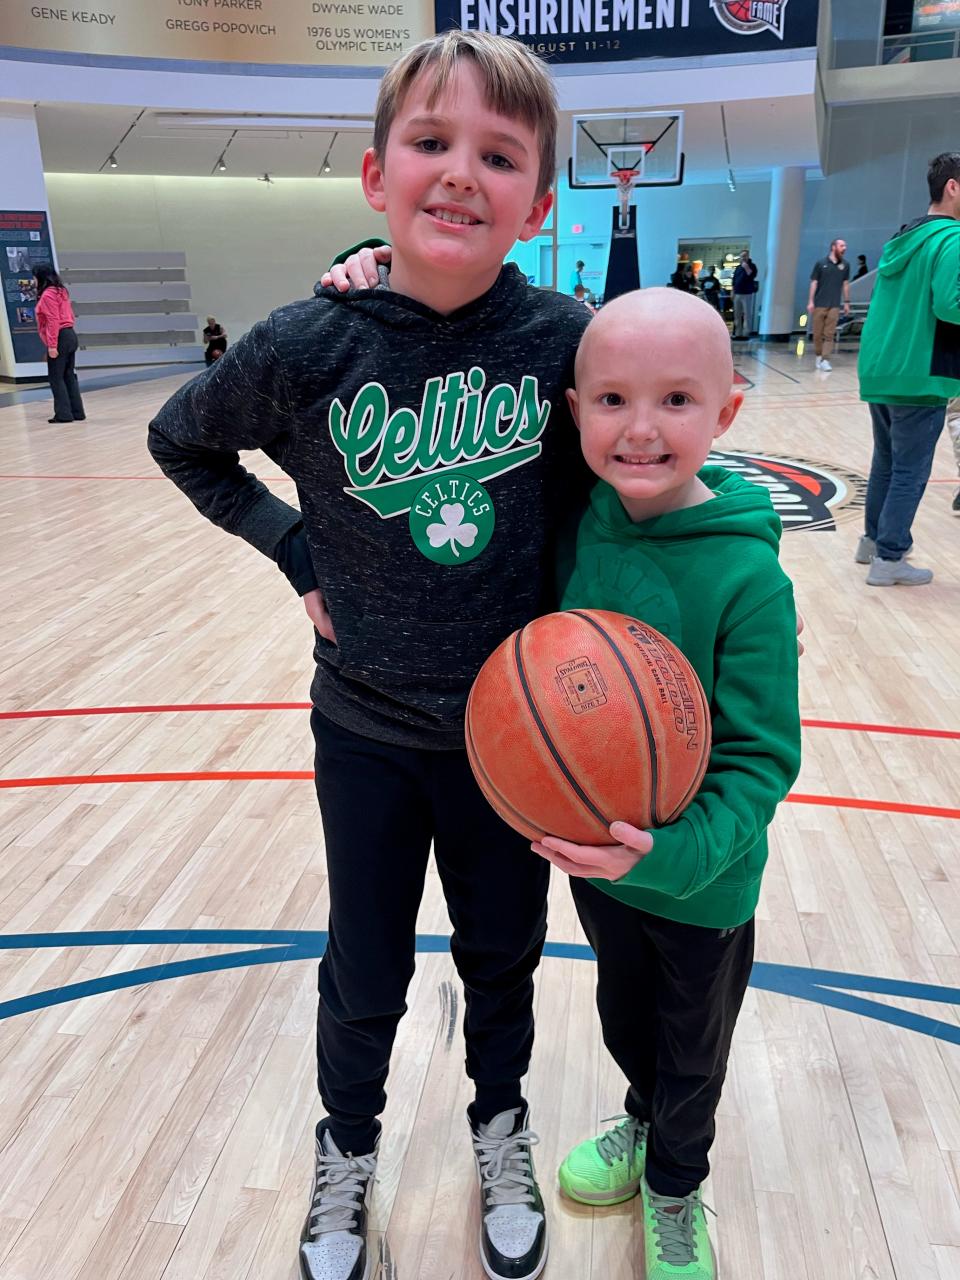 Liam and Sam Chapman both love to play basketball. Here they are at the International Basketball Hall of Fame in Springfield.